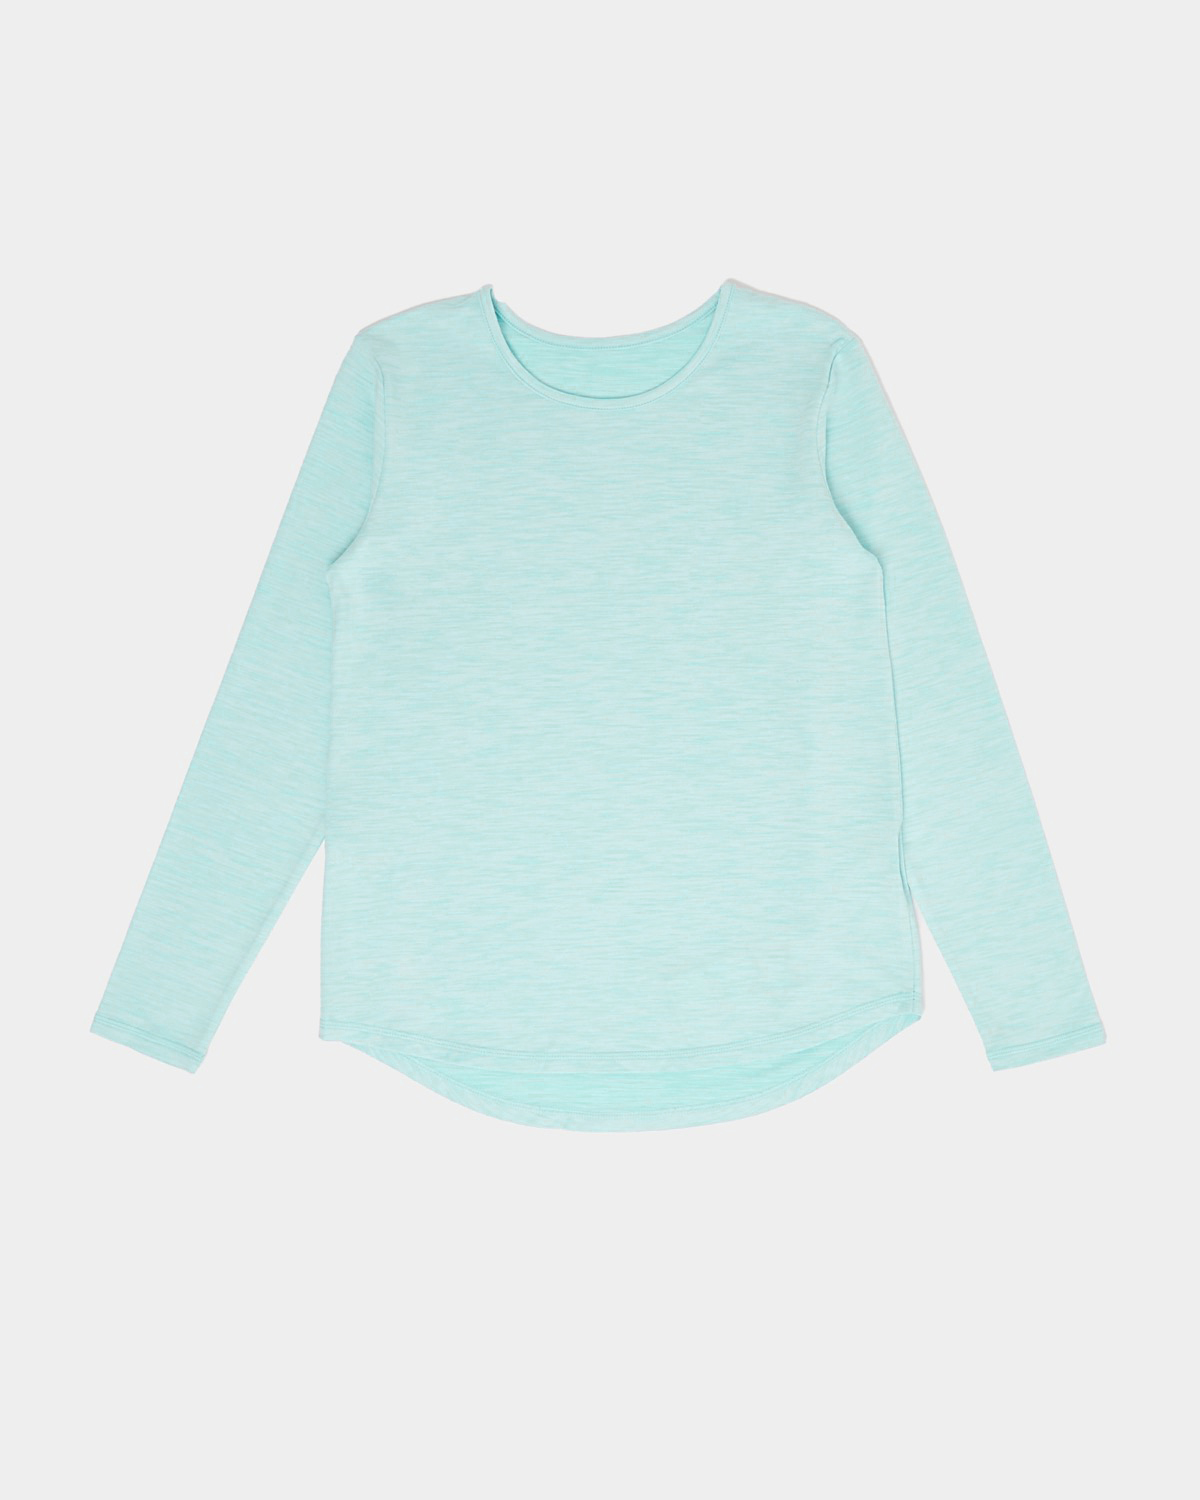 Dunnes Stores | Aqua Girls Long-Sleeved Sporty Top - 5-14 years